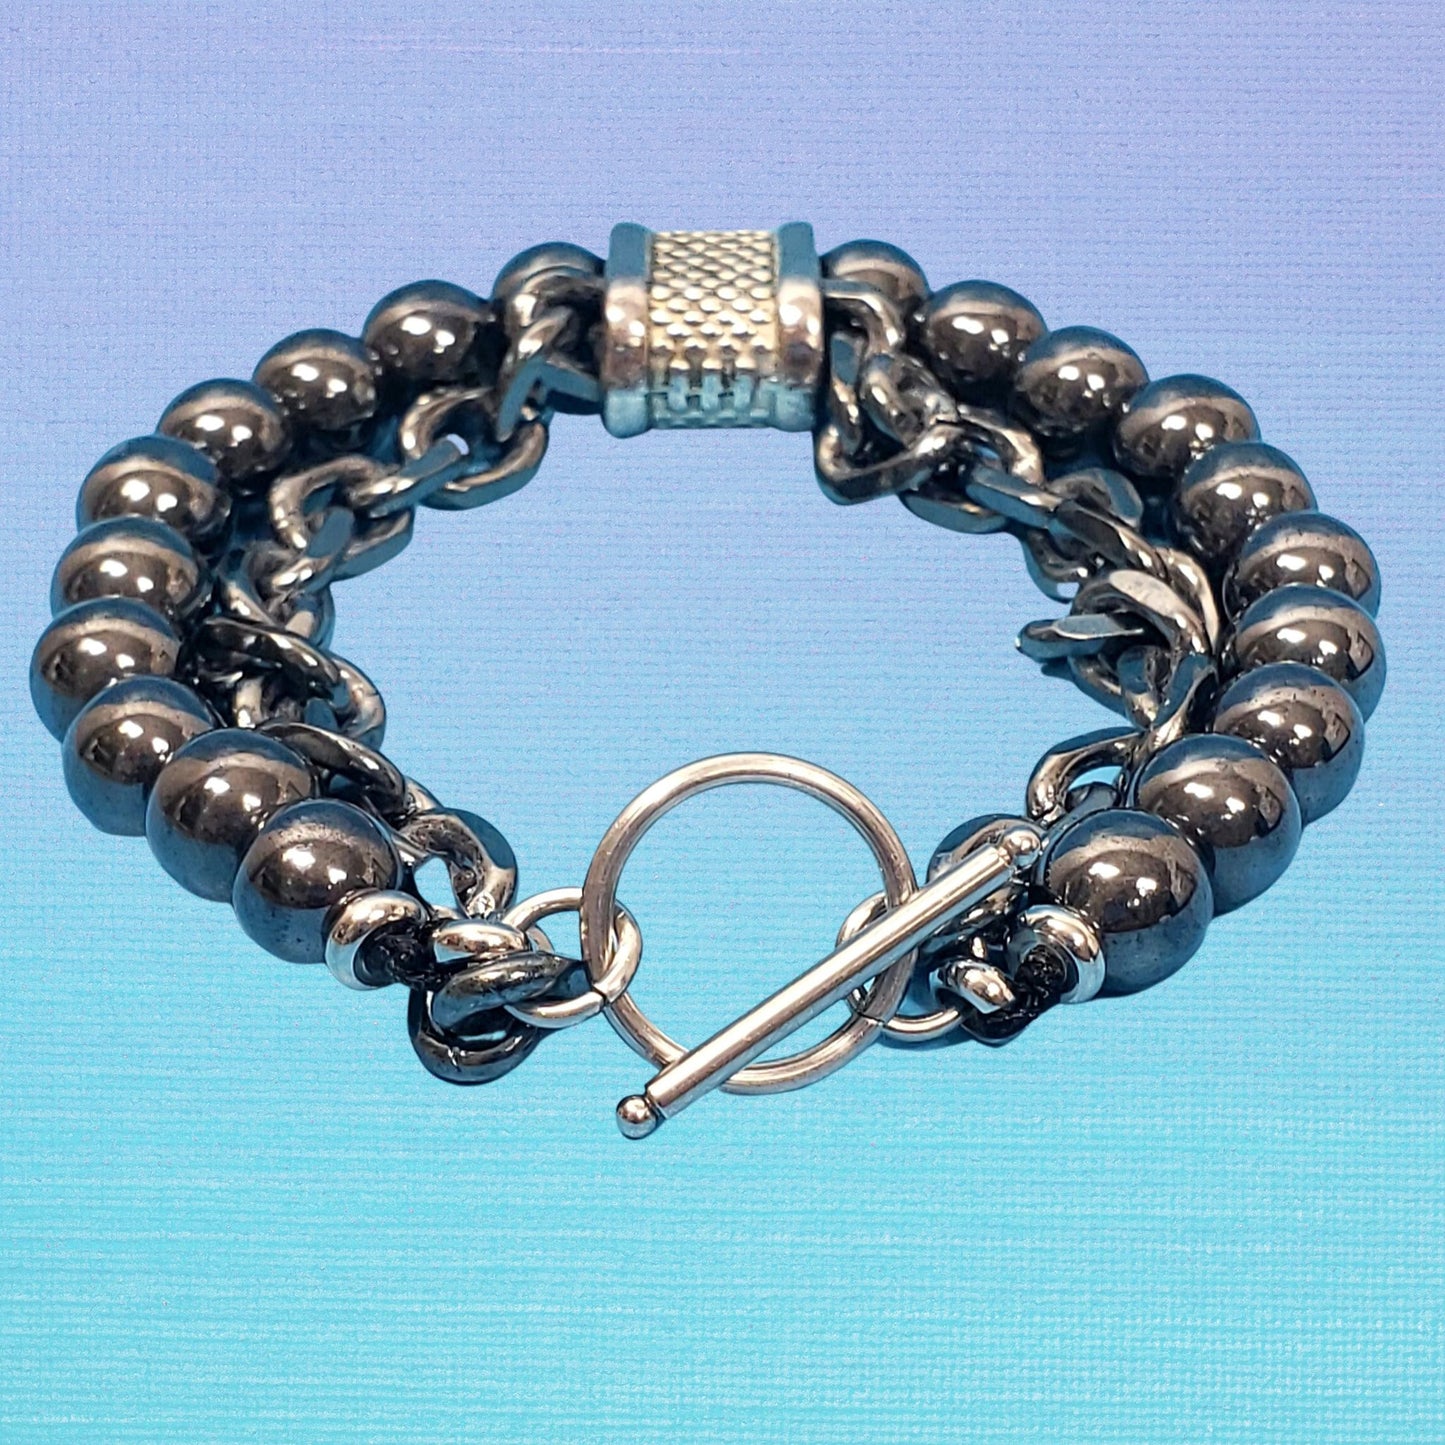 Hematite Bracelet with Chain and Toggle Clasp